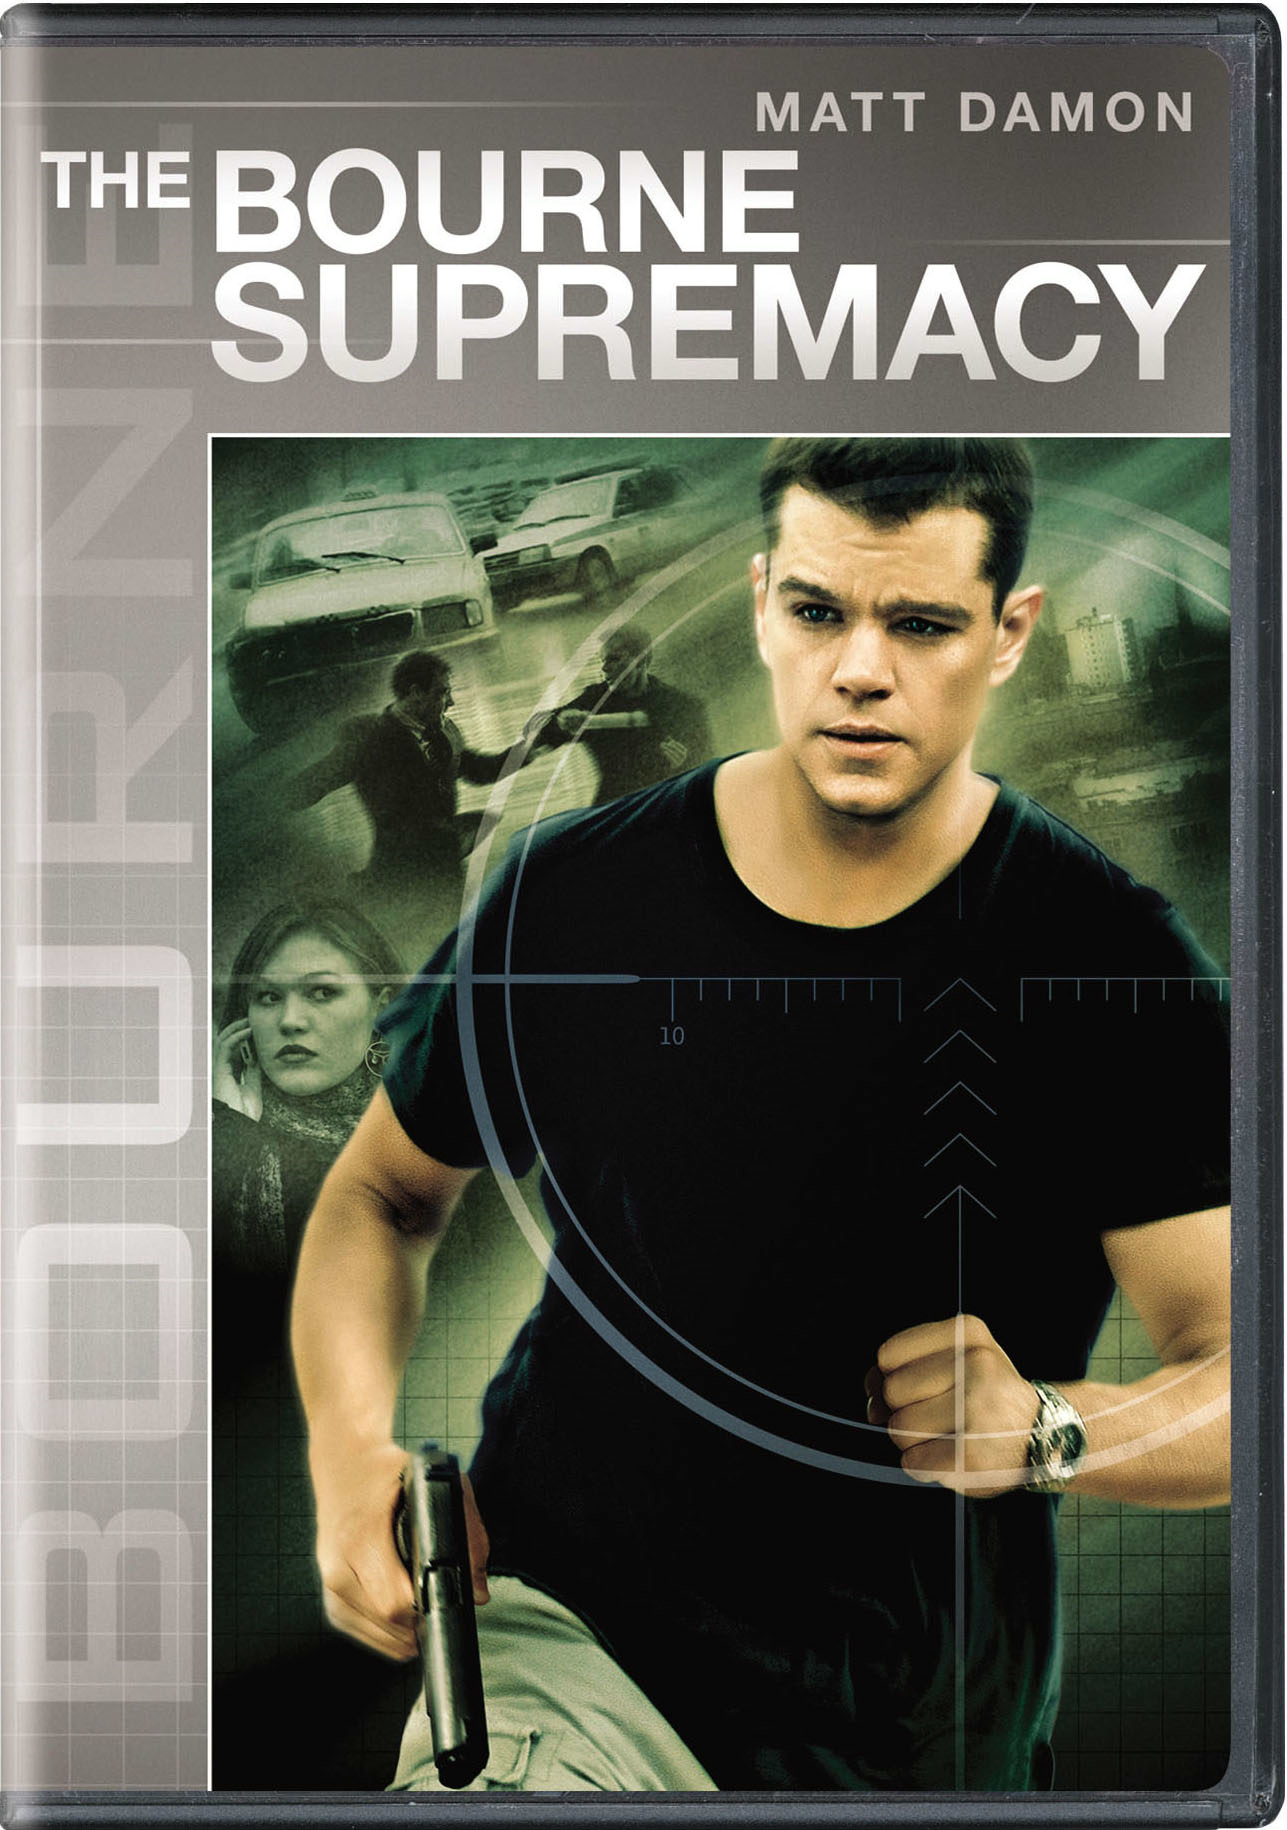 The Bourne Supremacy (DVD New Box Art) - DVD [ 2004 ]  - Thriller Movies On DVD - Movies On GRUV